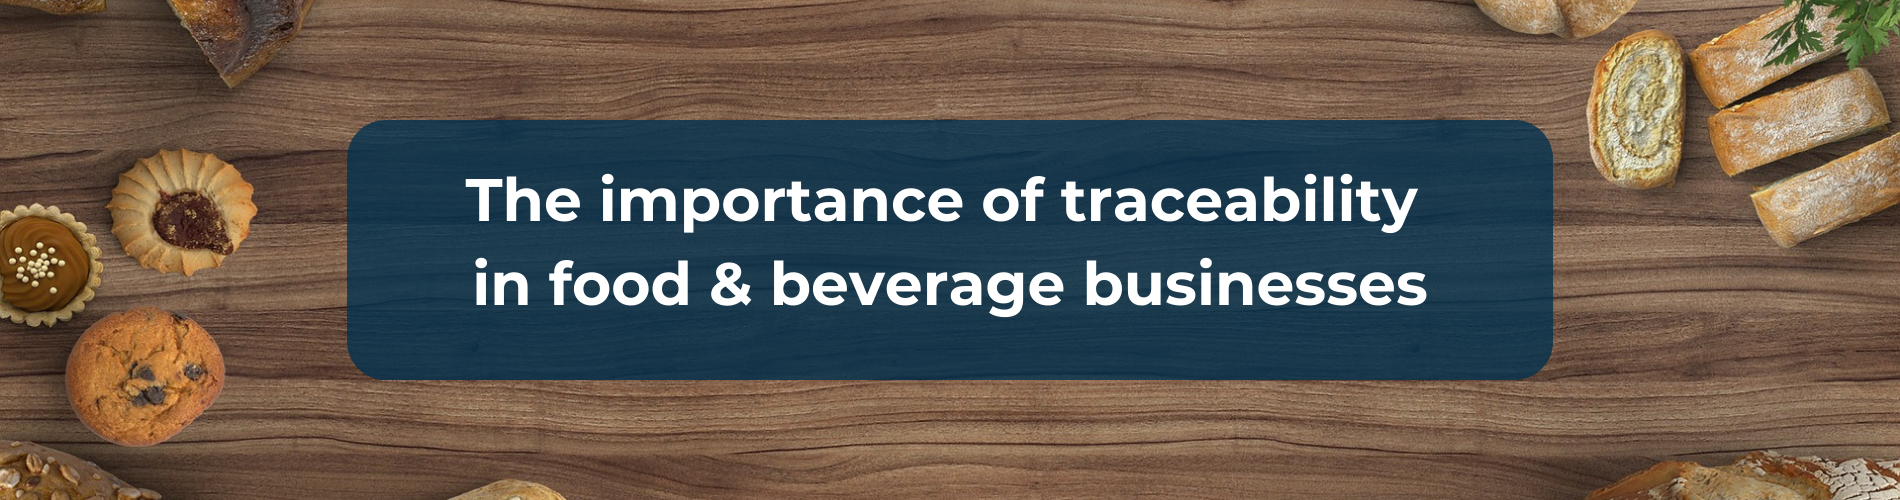 Traceability in food and beverage businesses